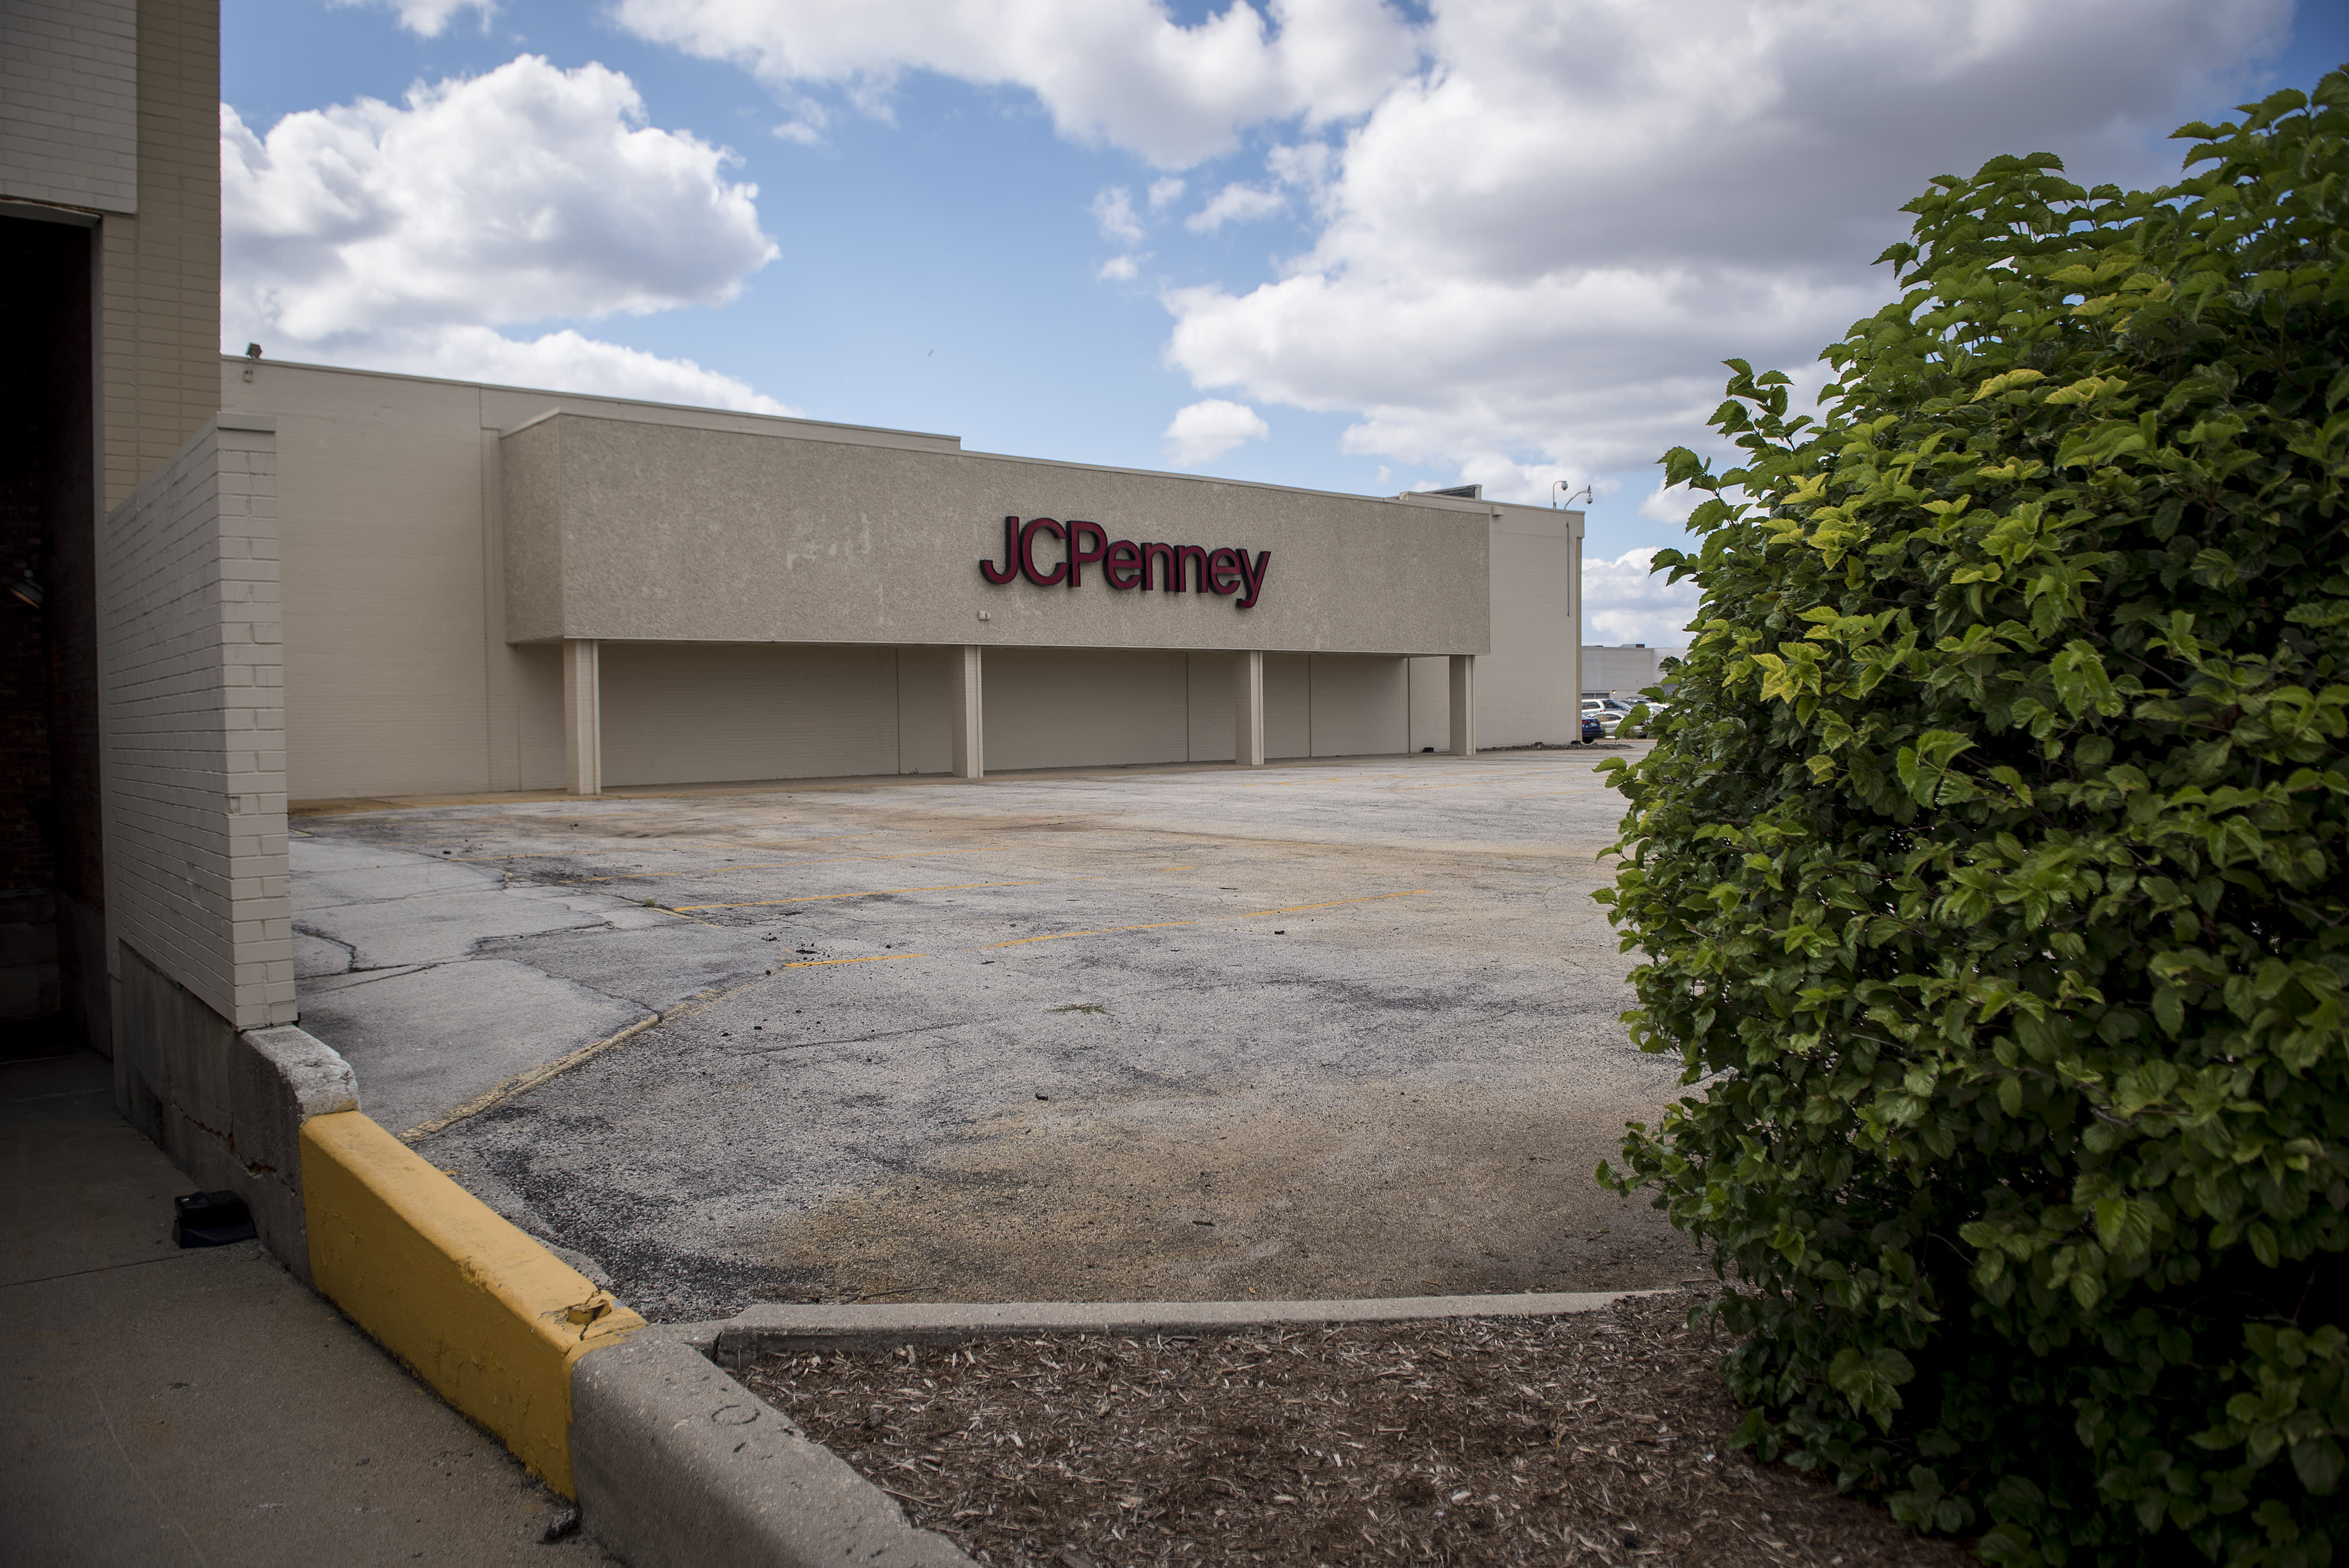 JC Penney CEO Jill Soltau to leave retailer after going bankrupt